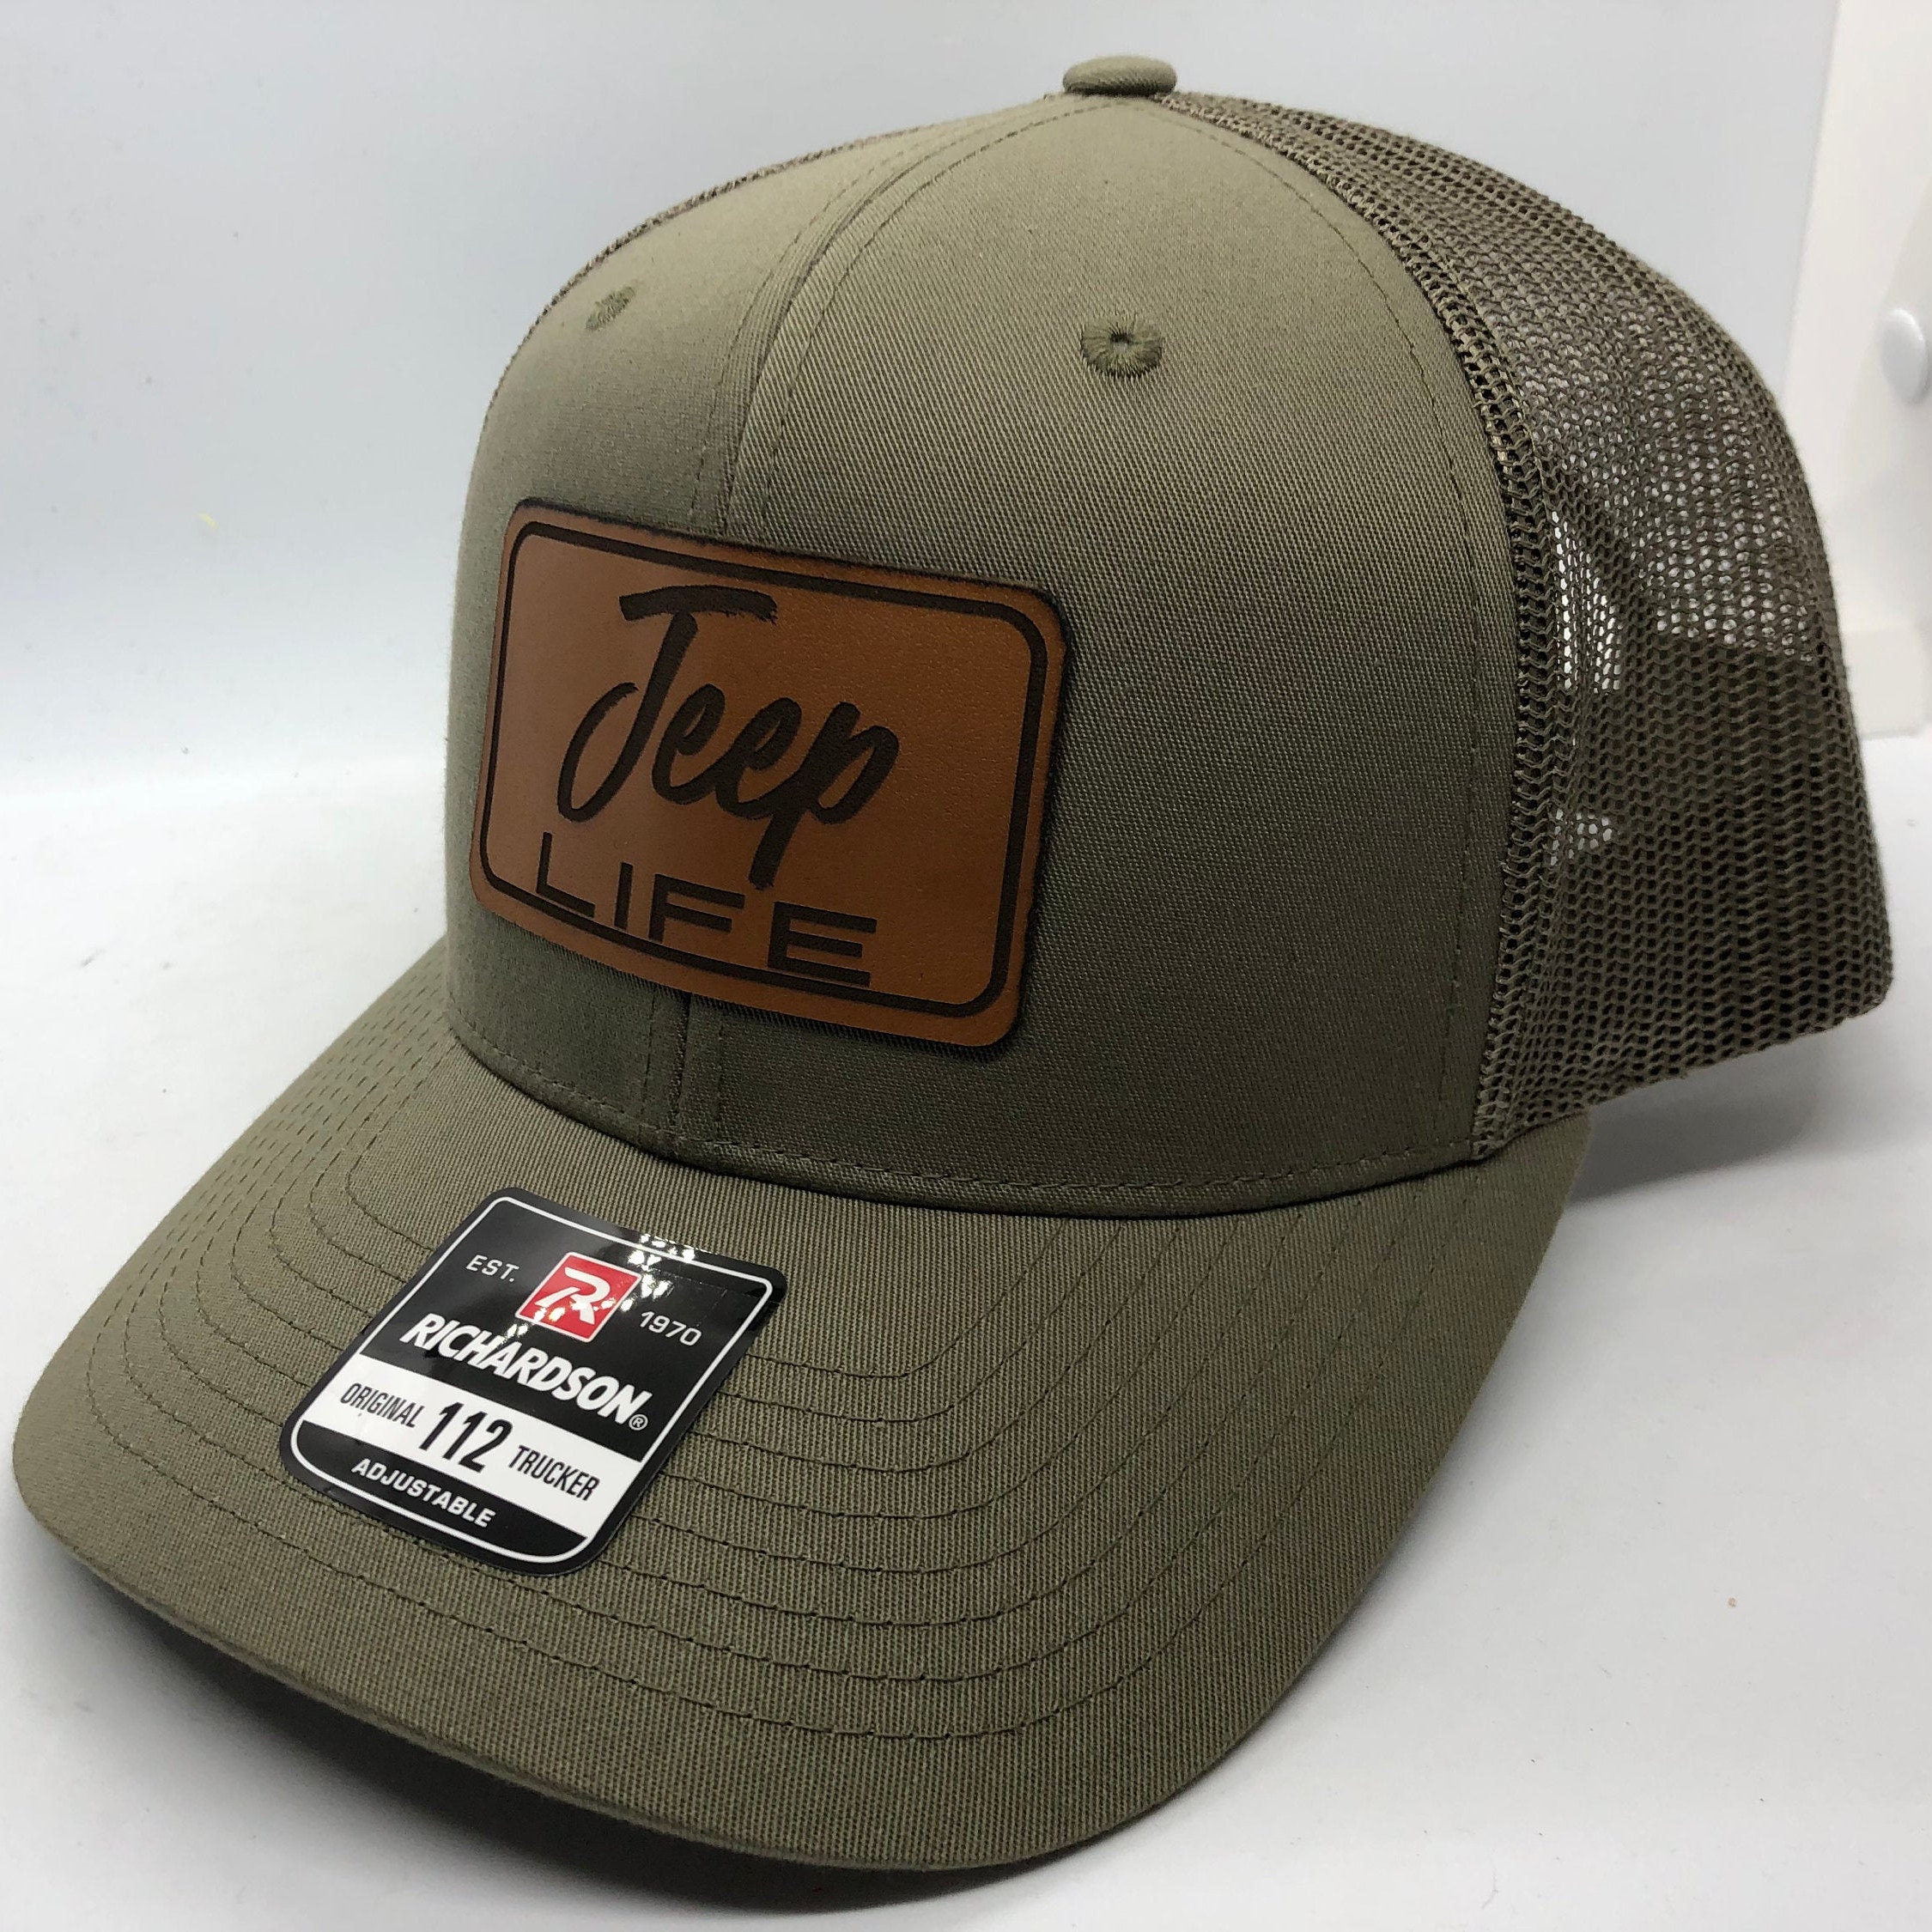 Jeep Life Hat Jeep Wrangler Its a Jeep Thing Hat Four Wheeler | Etsy